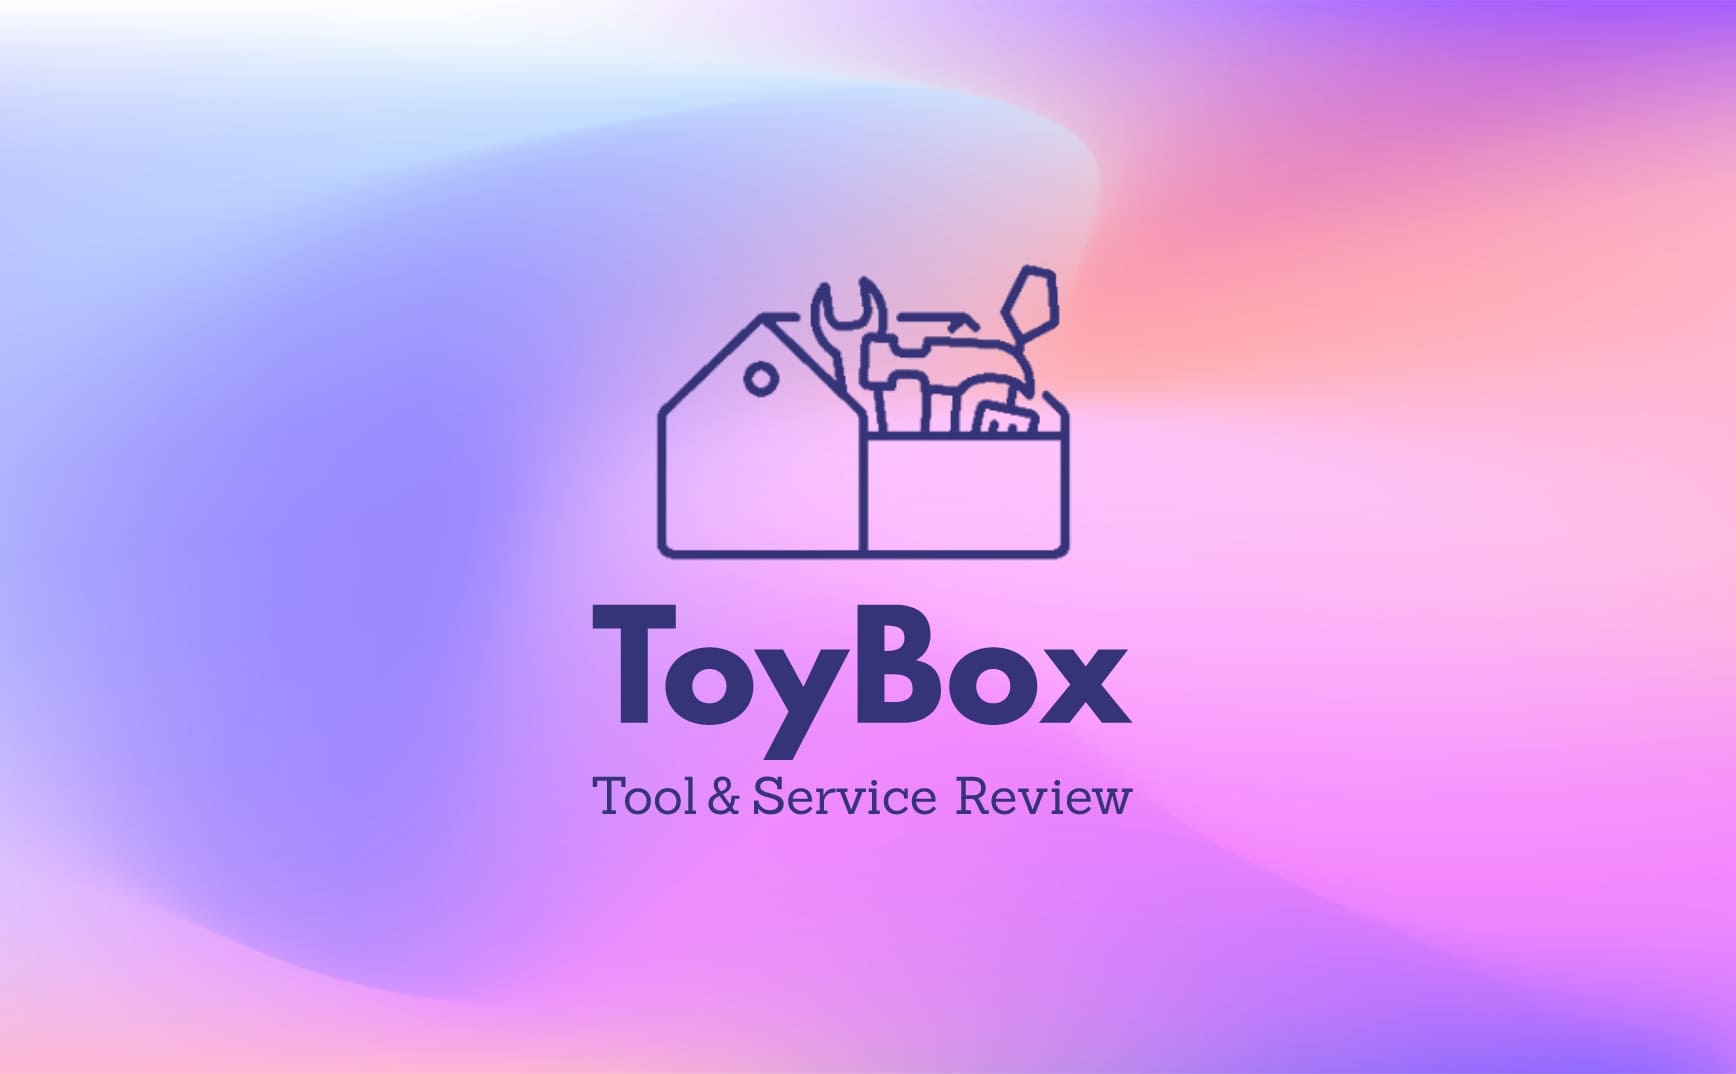 ToyBox Tool & Service Review